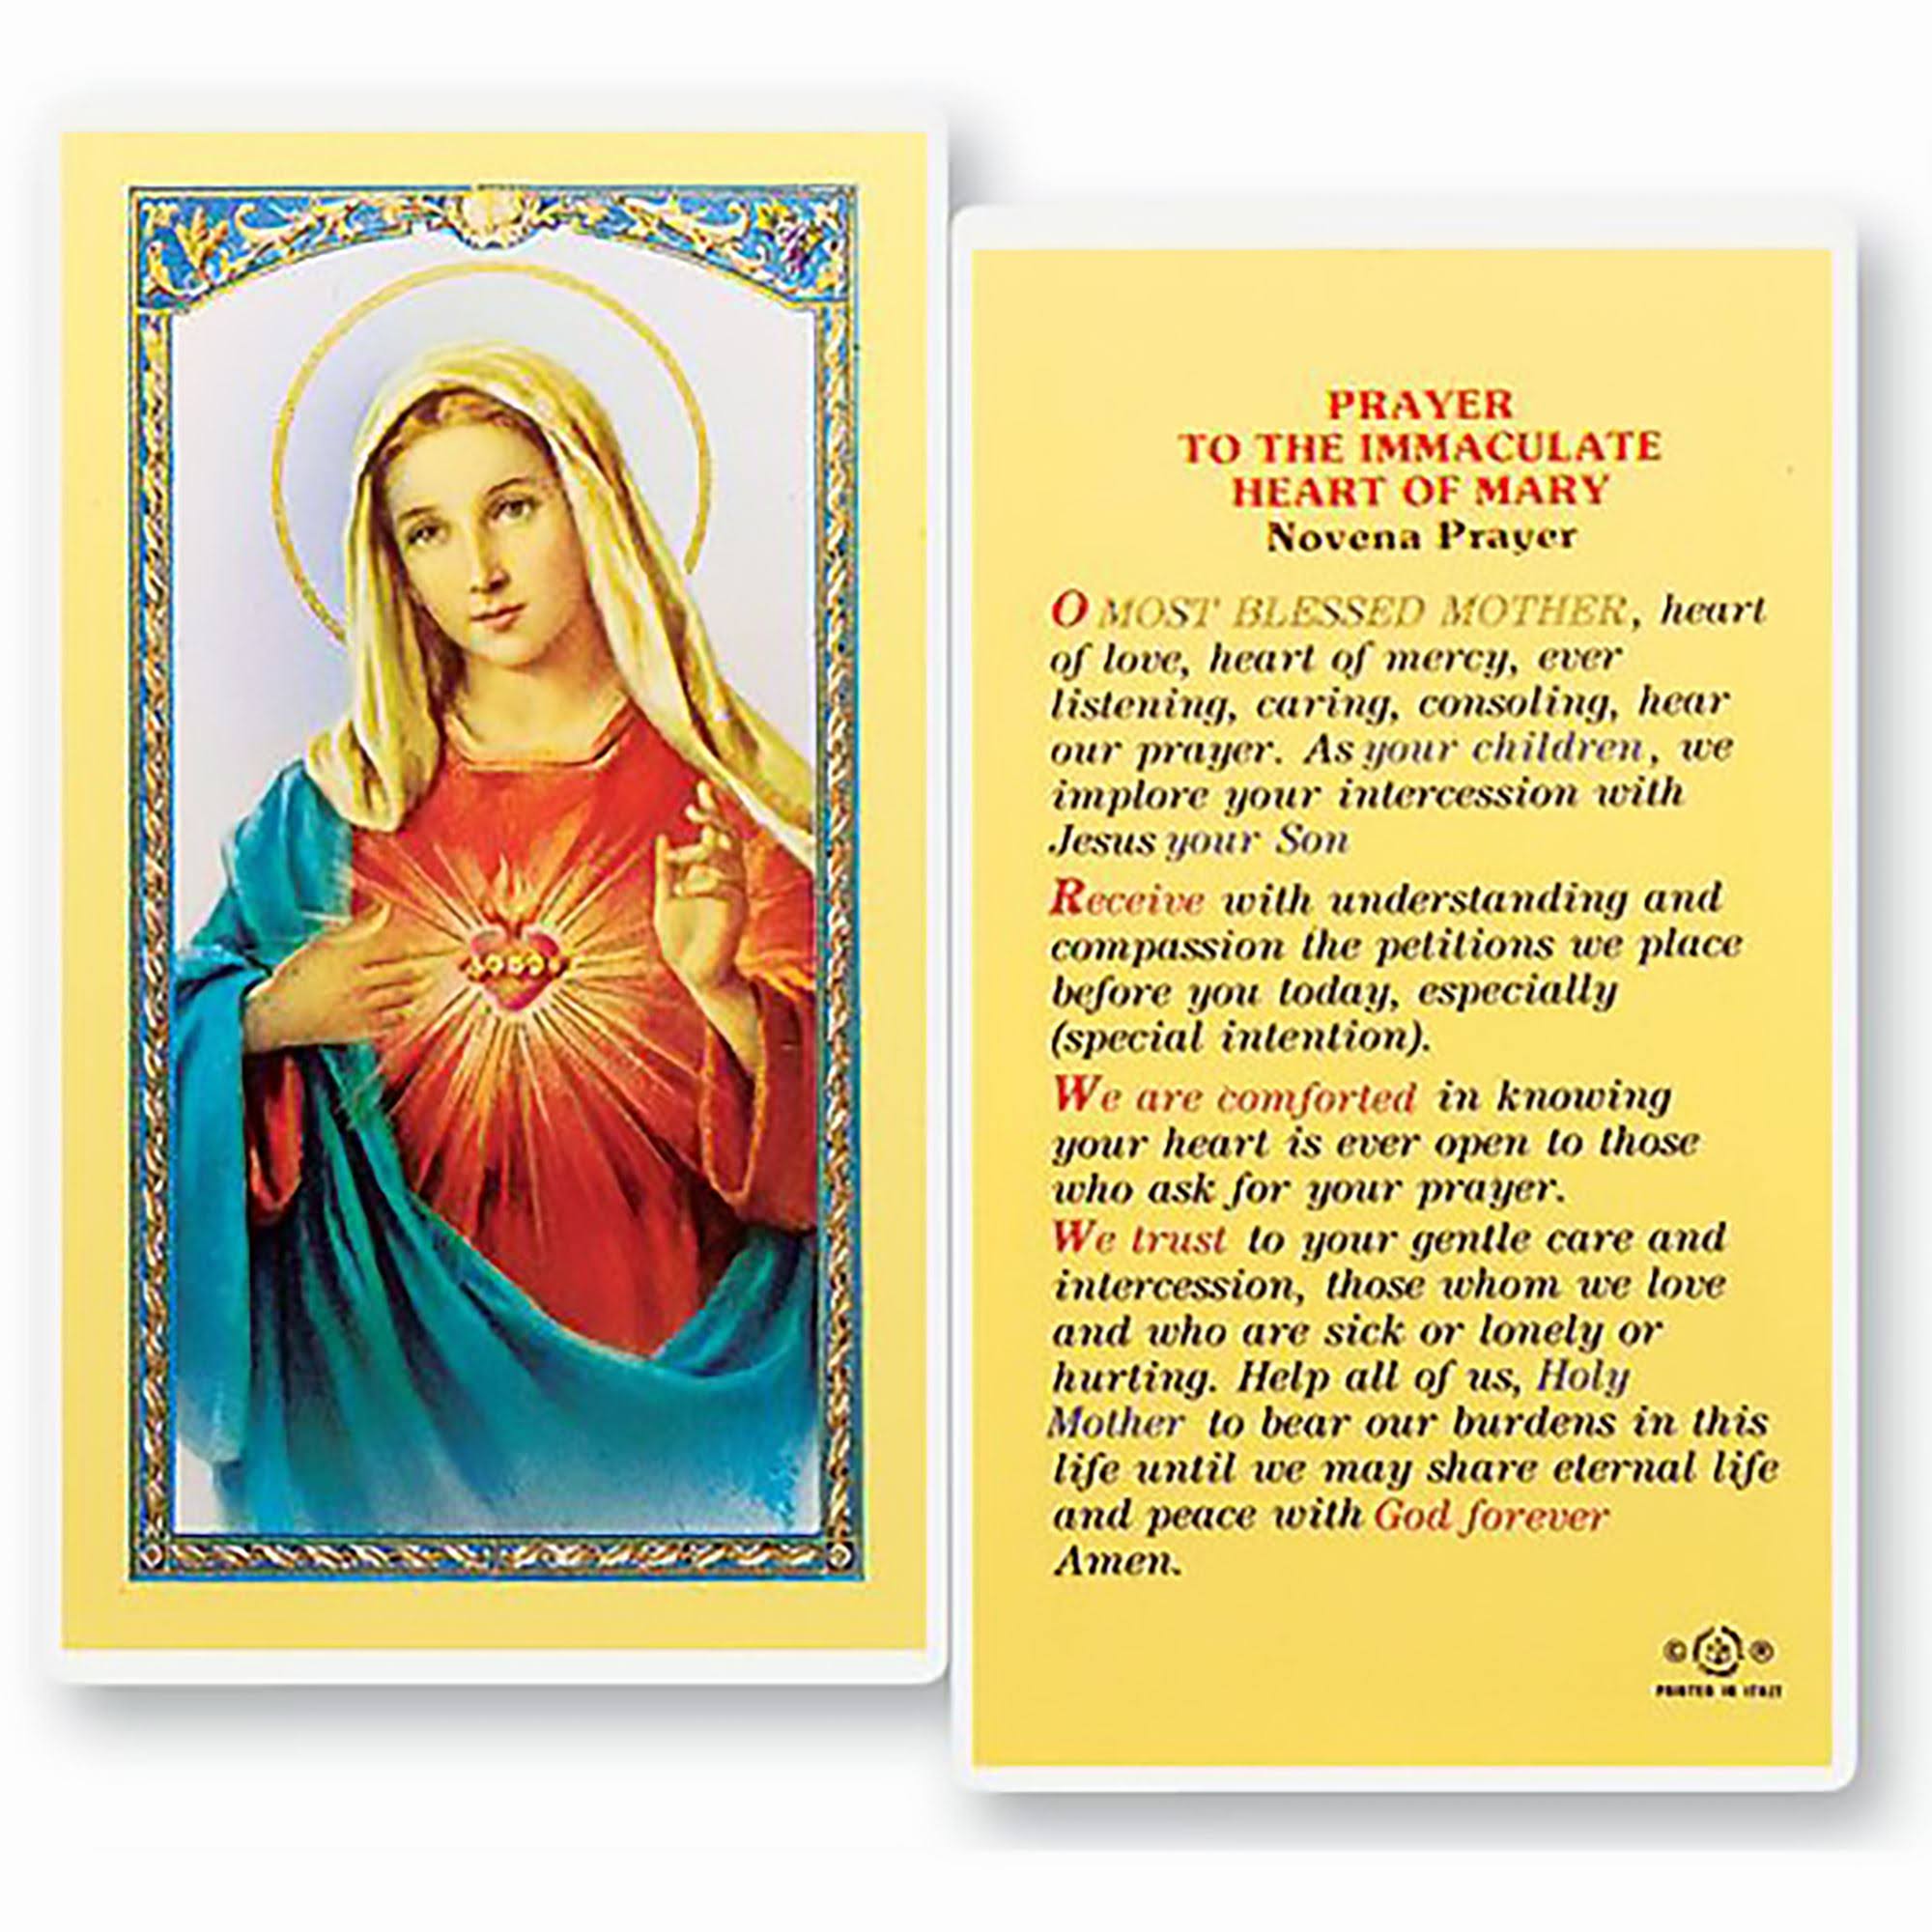 Novena Prayer To The Immaculate Heart Holy Card (800-011)